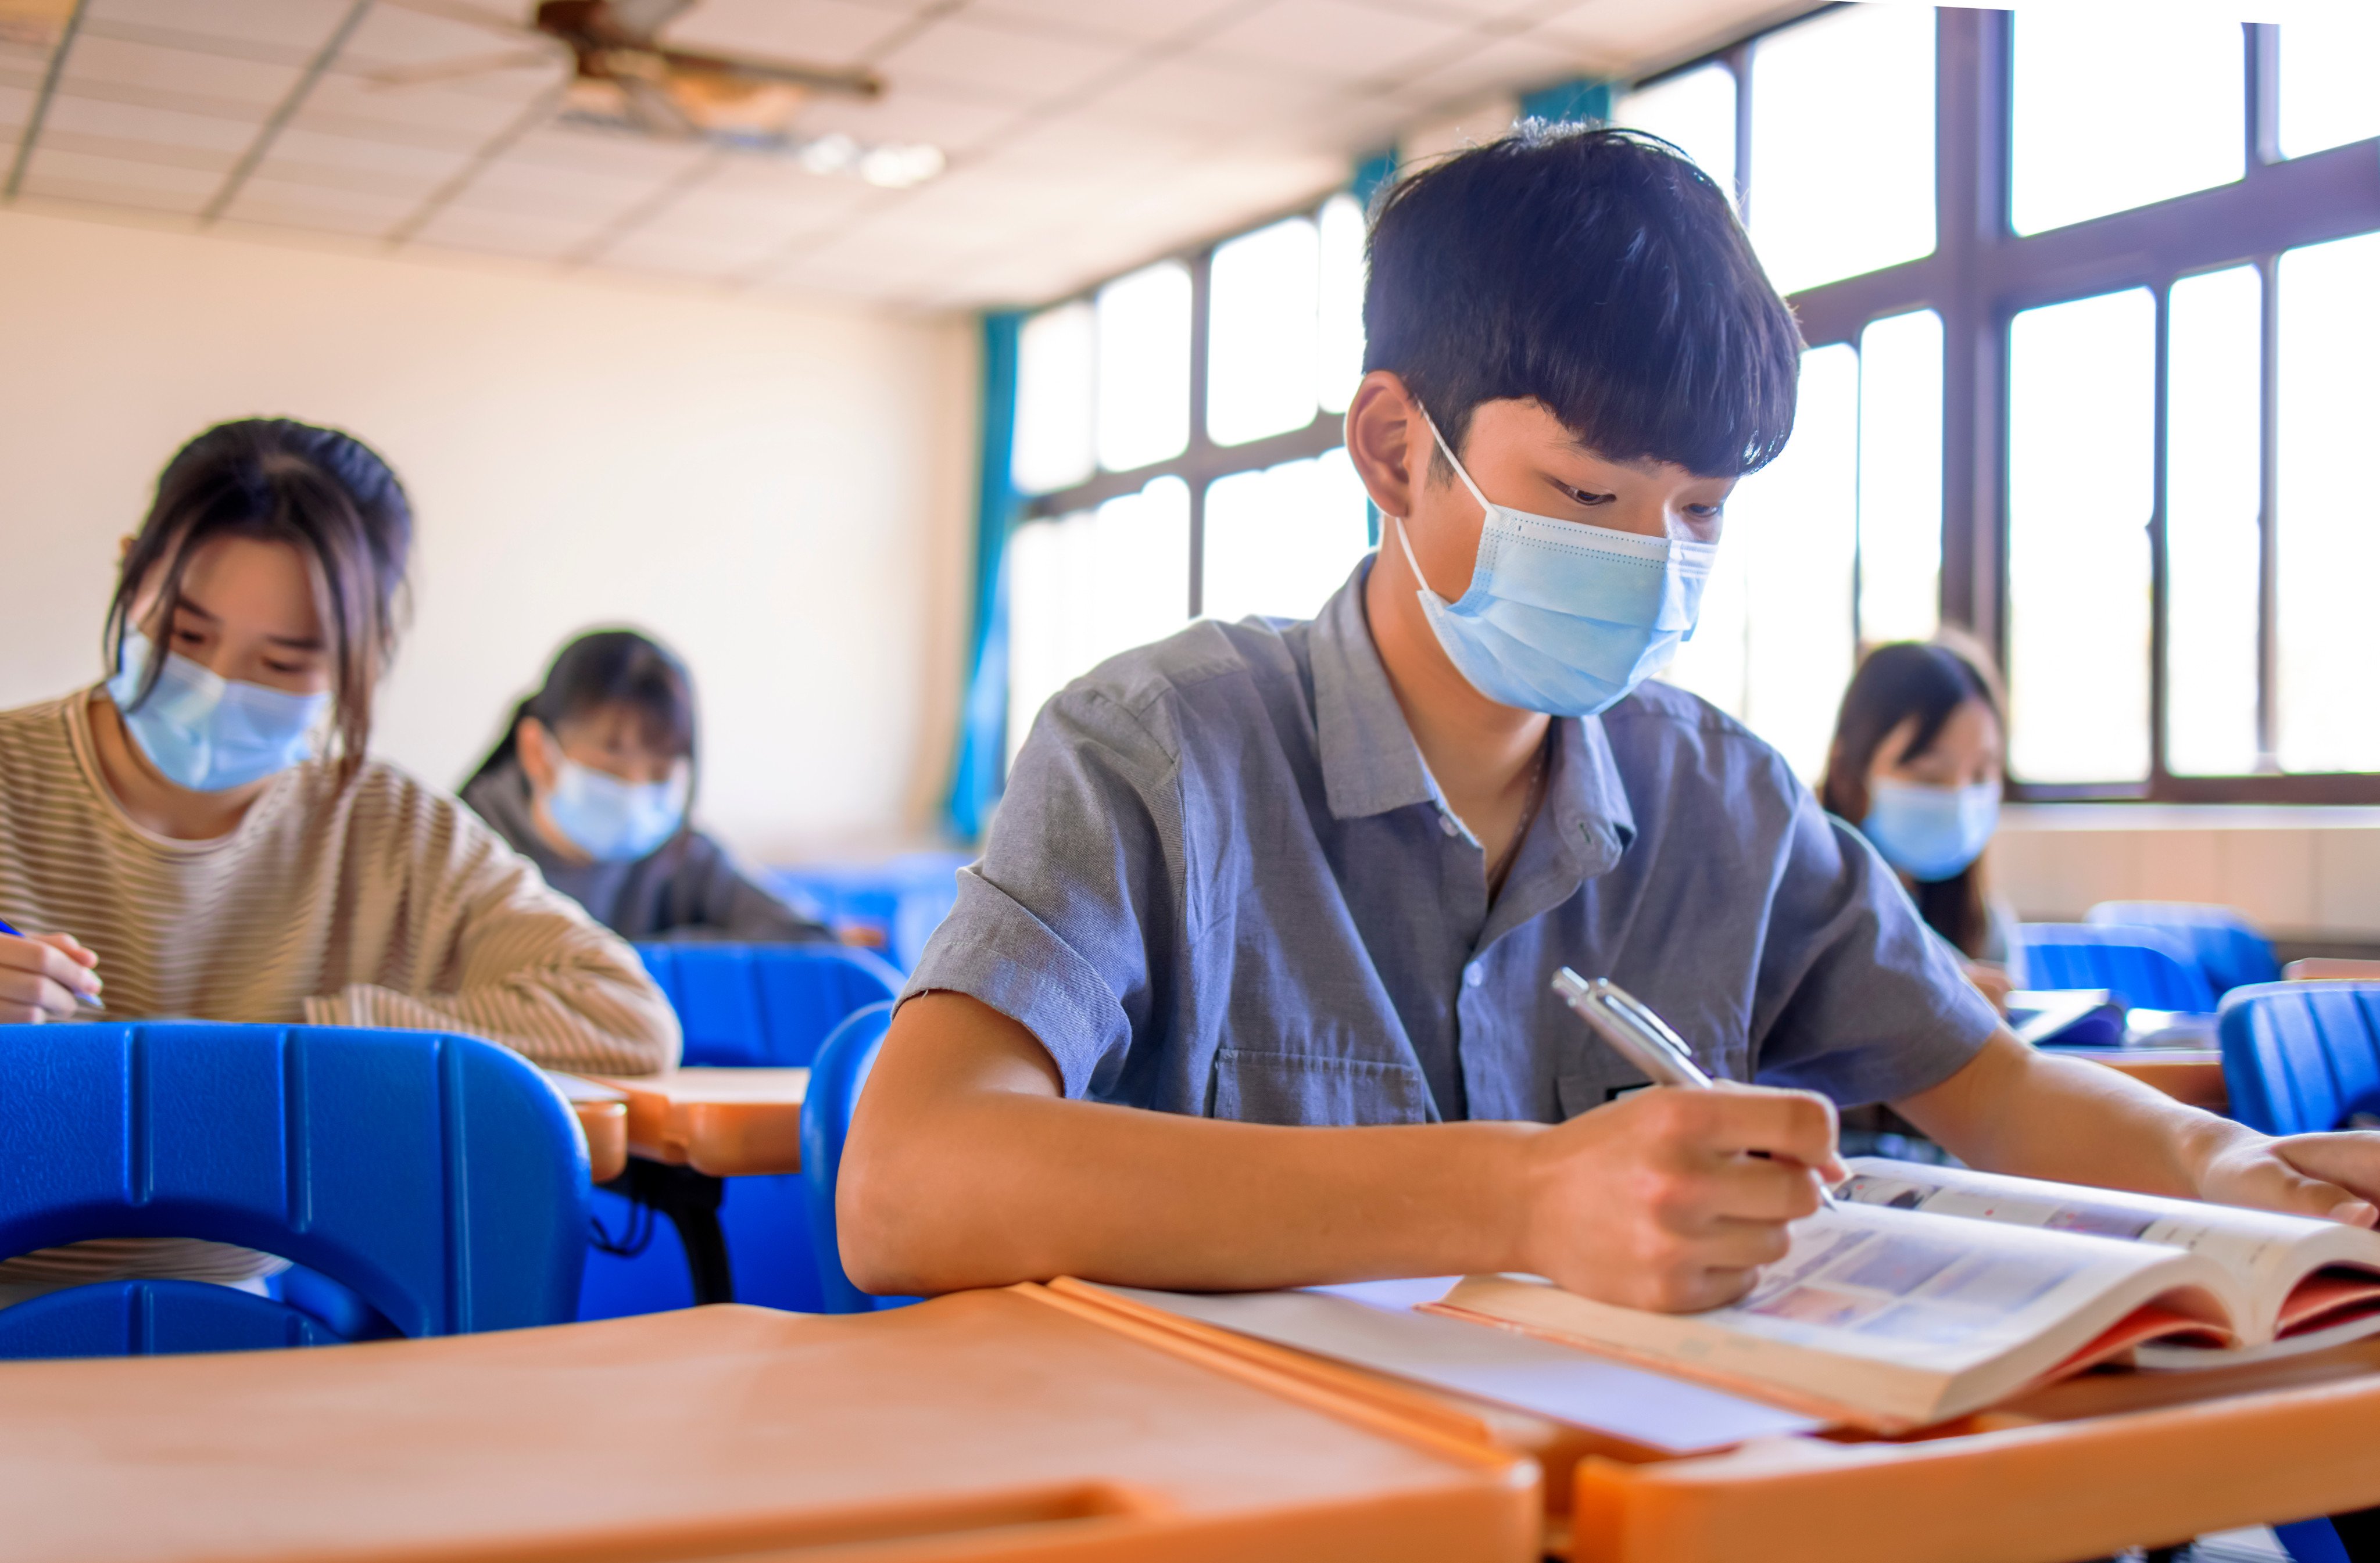 Taiwan’s Ministry of Education says it has no plan to abolish classical Chinese and the existing curriculum still covers a sizeable portion of ancient Chinese writings. Photo: Shutterstock